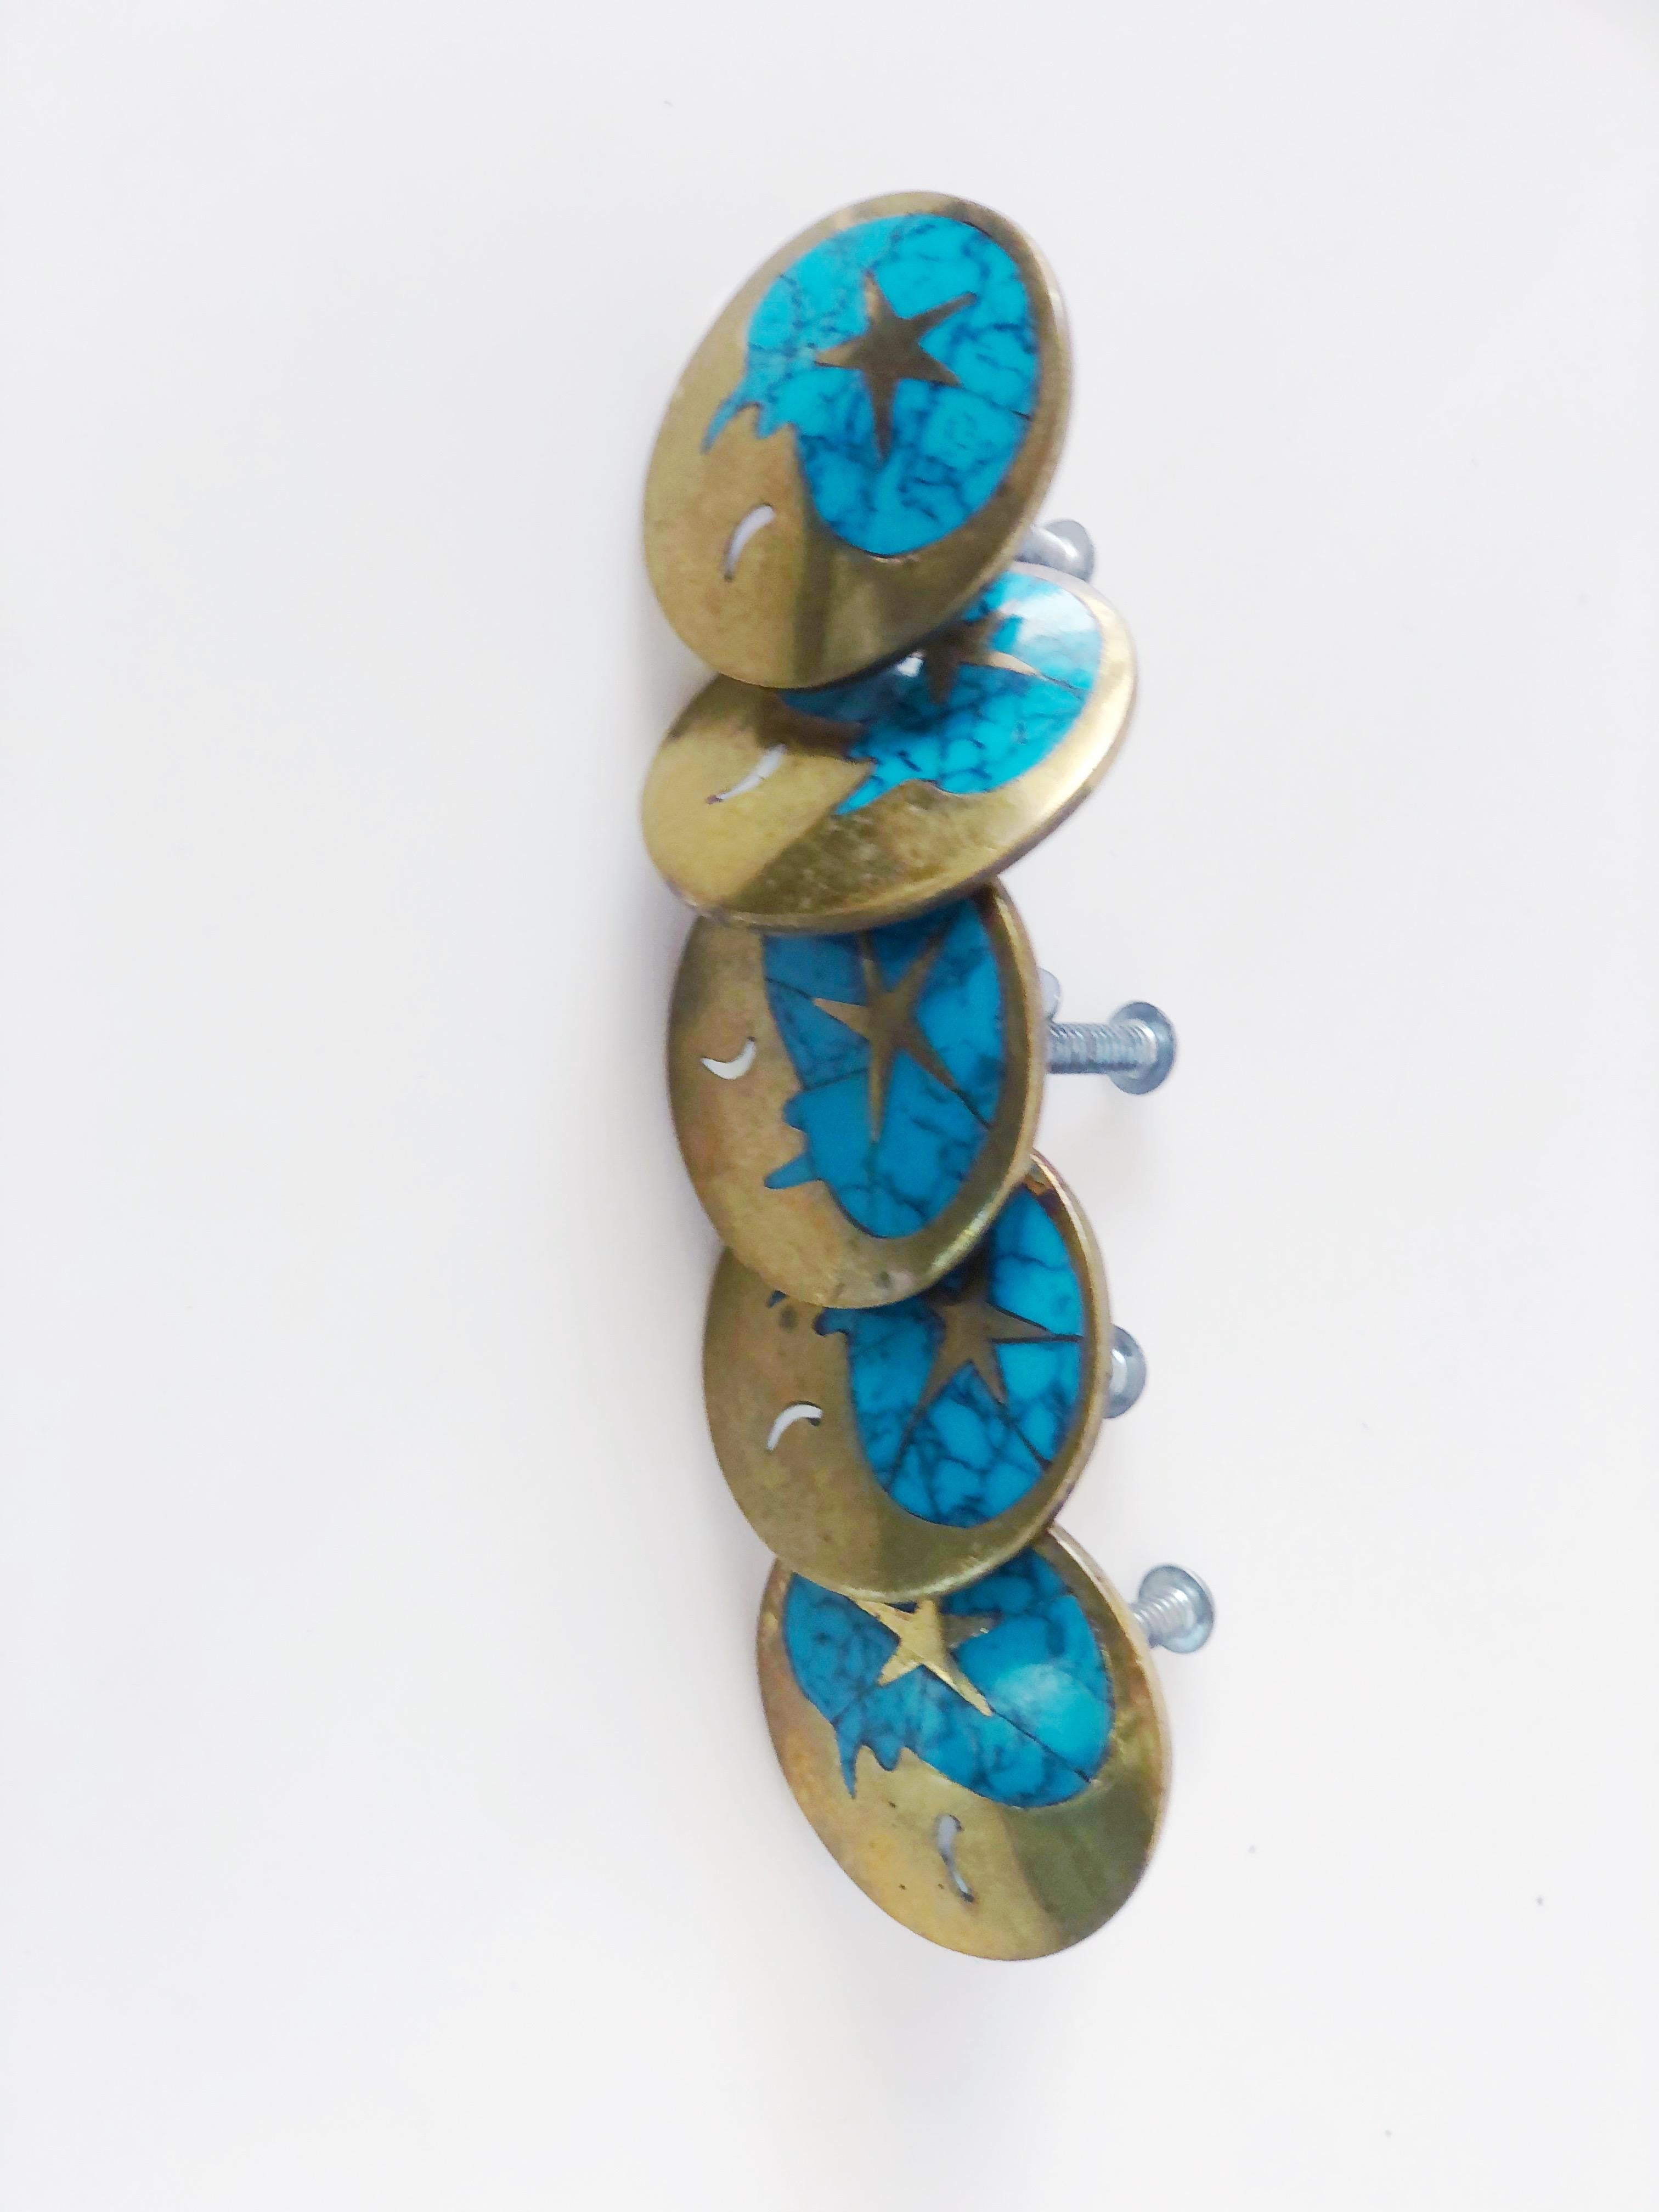 Mexican Vintage Blue Turquoise and Brass Drawer Pulls by Los Castillos, Mexico, c. 1960s